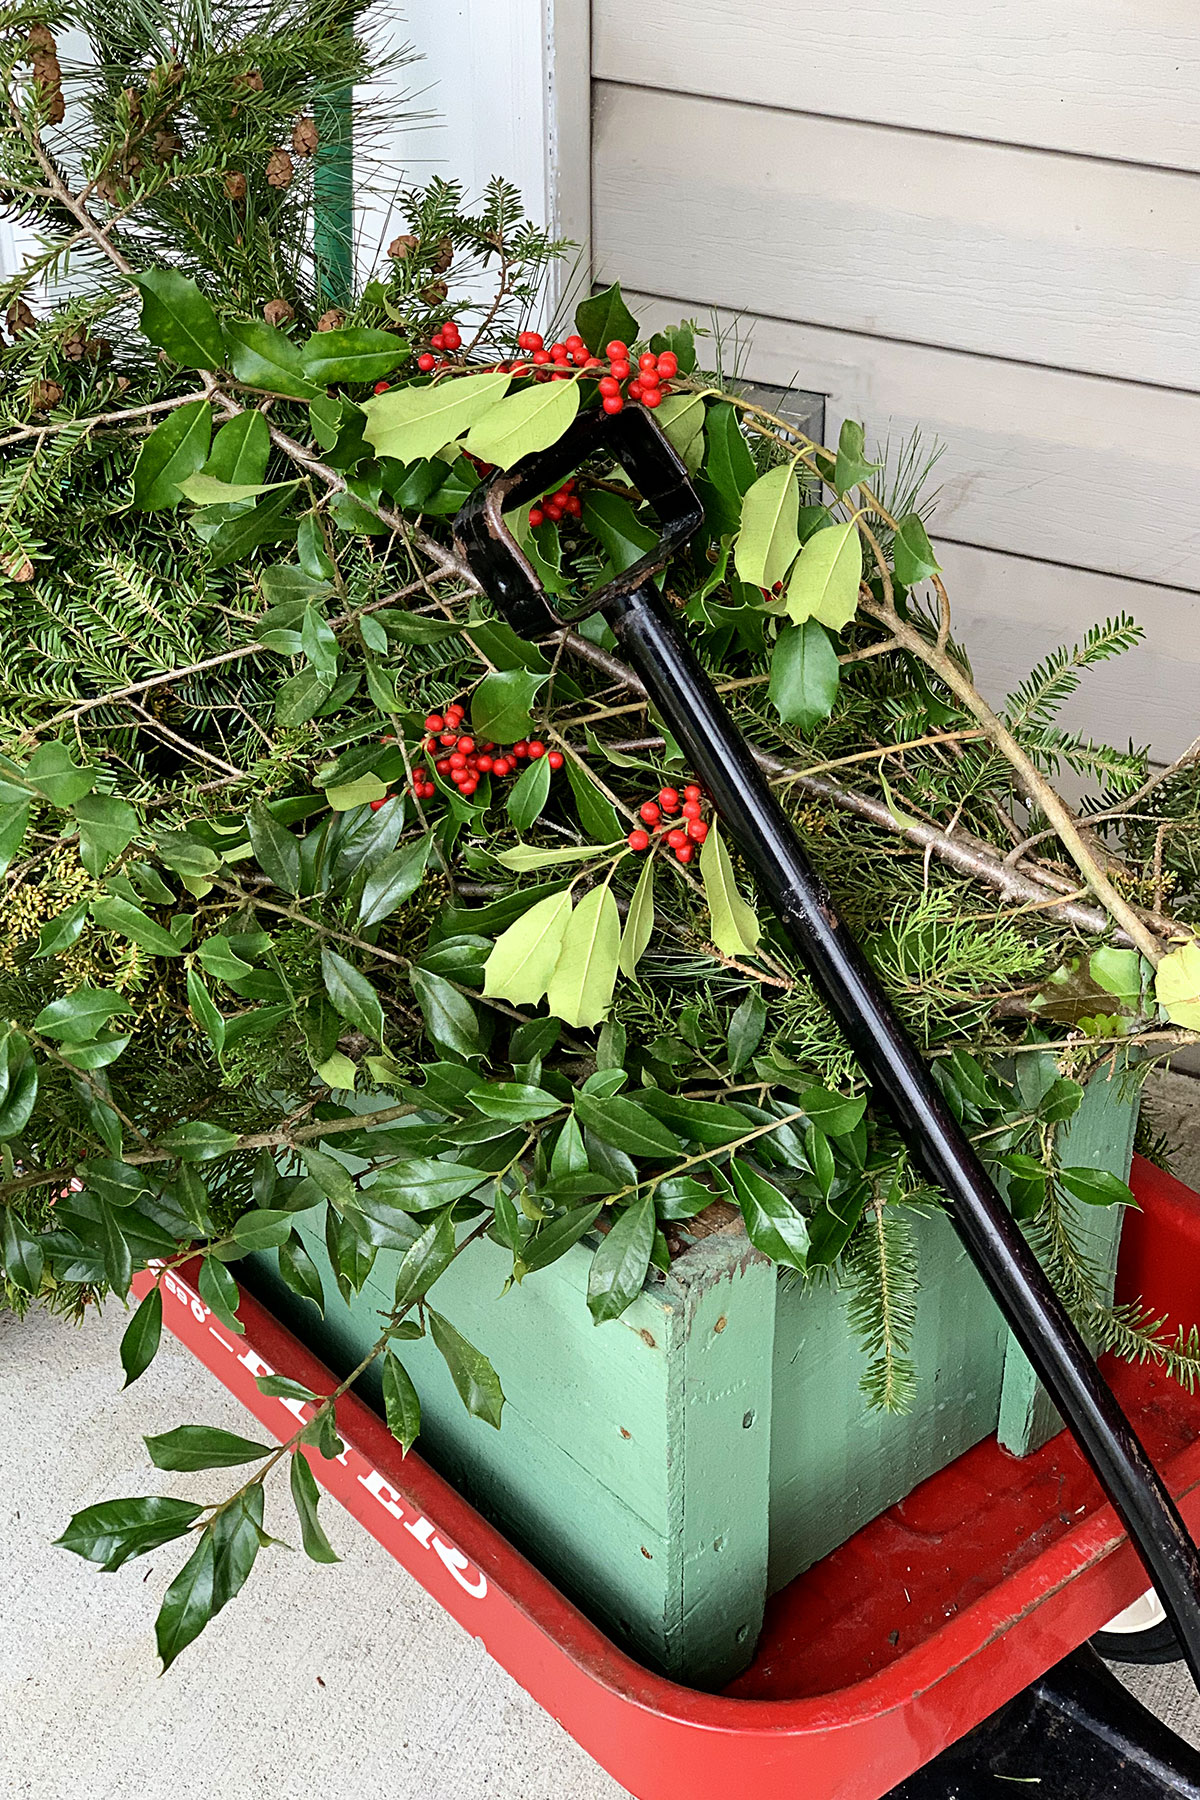 A Radio Flyer red wagon used as decoration on a Christmas porch. 